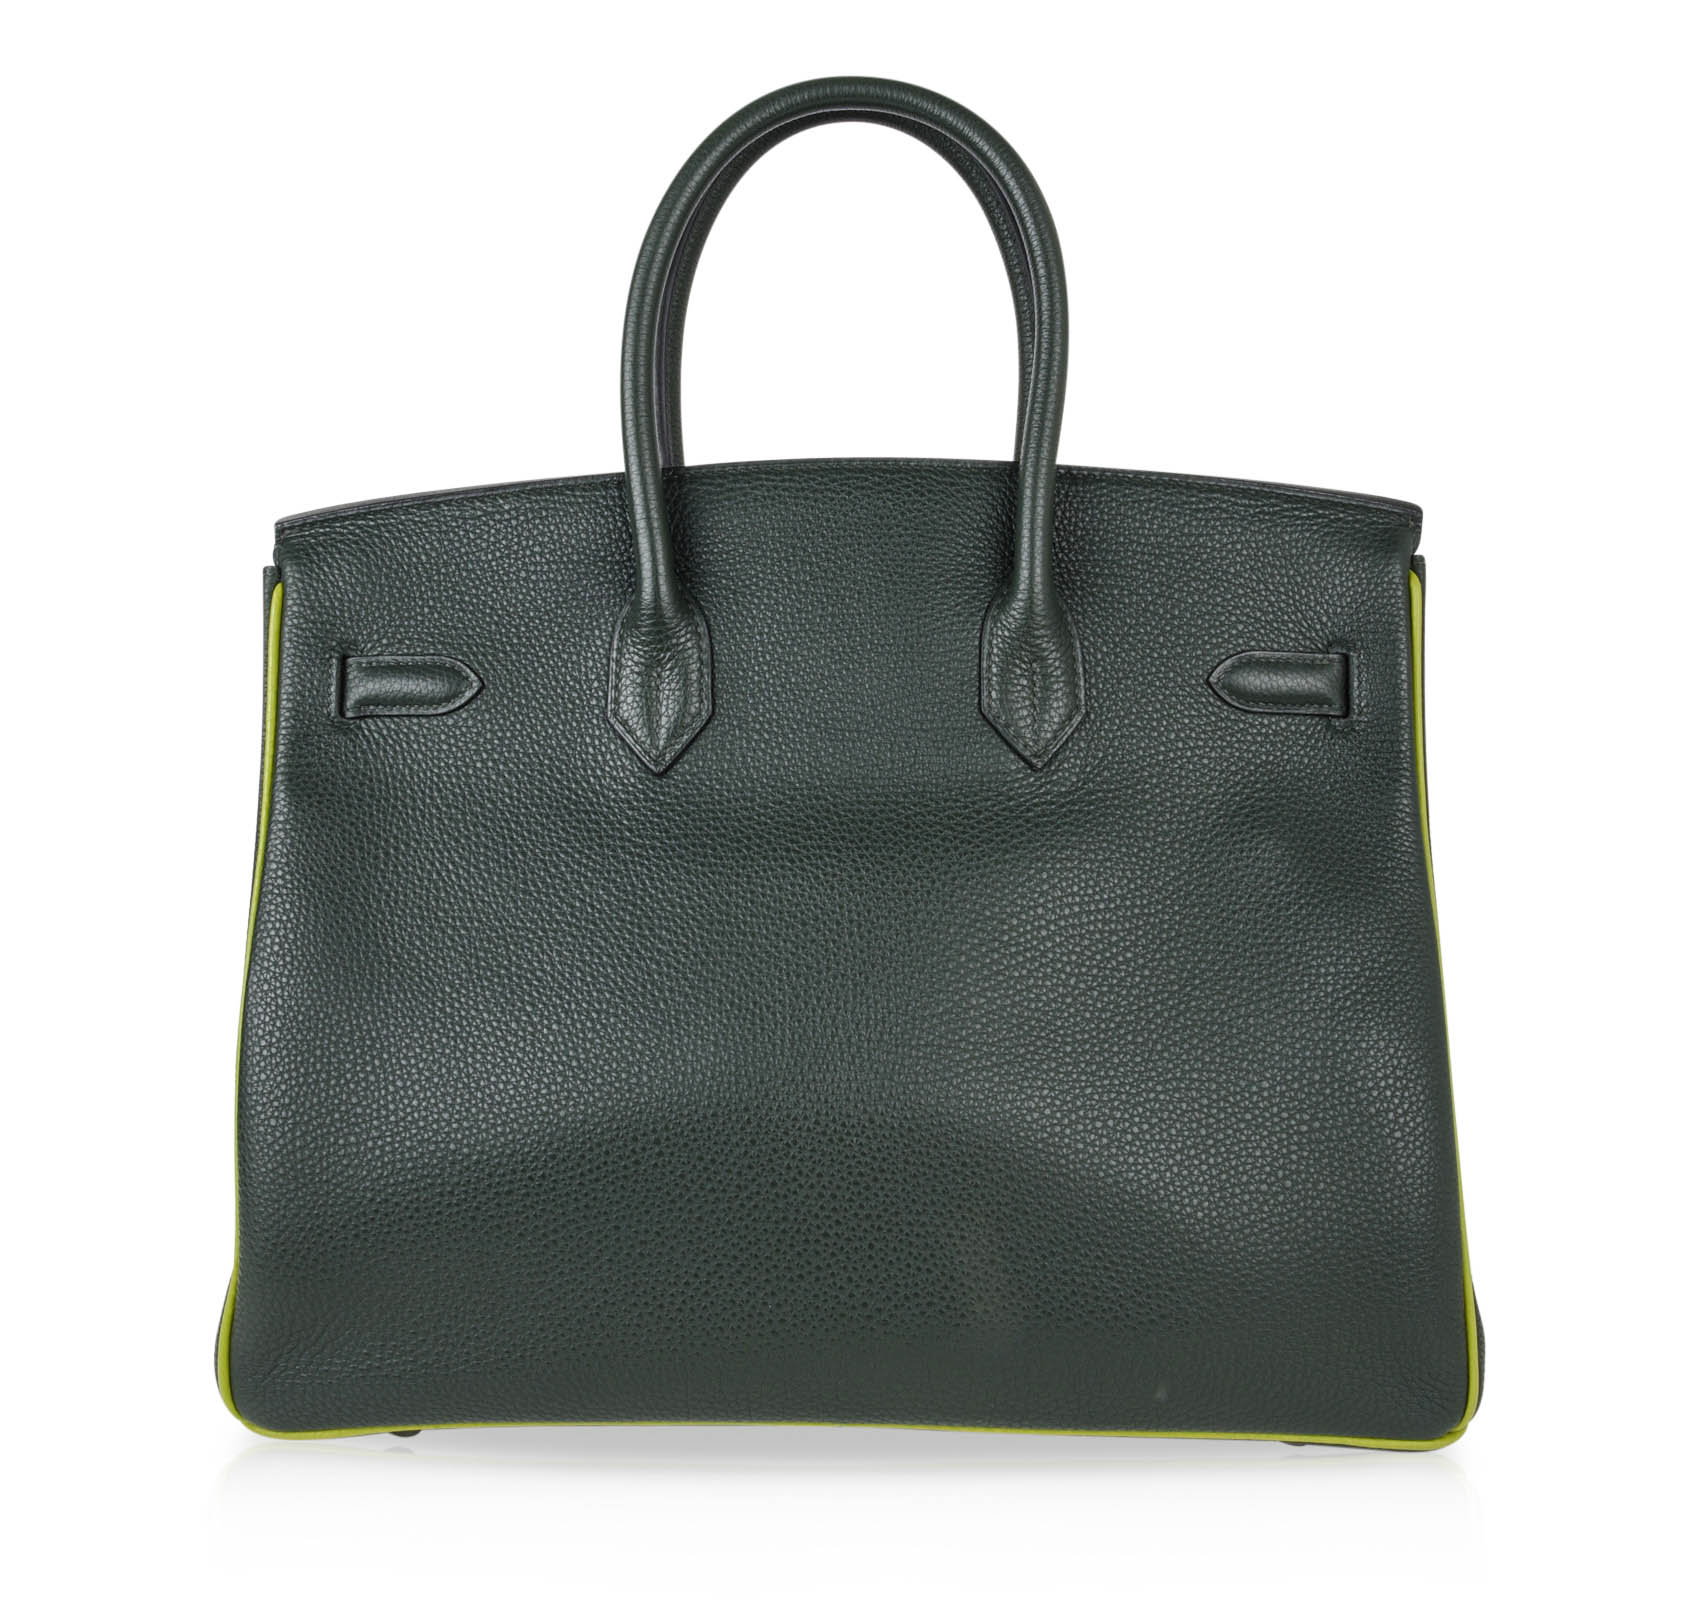 Hermes Birkin 35 Bag Vert Fonce Anis Piping Chartreuse Interior Ruthen –  Mightychic